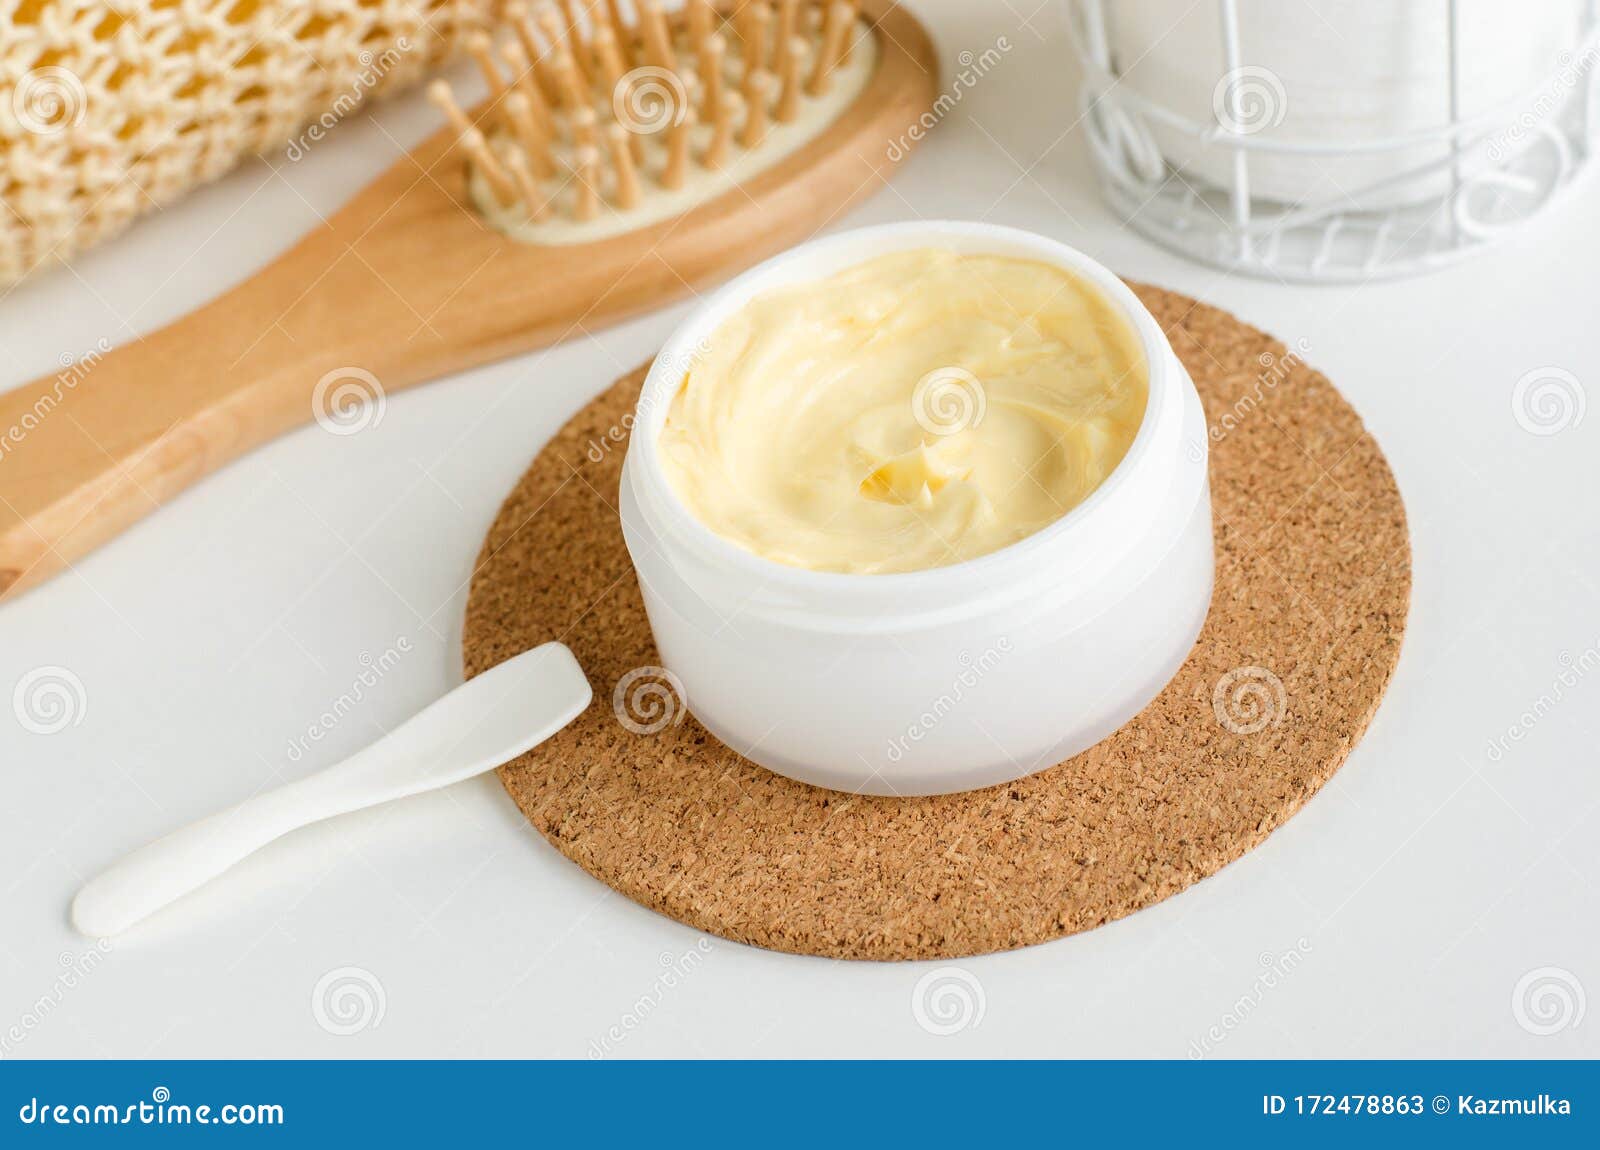 Yellow Facial Mask Banana Face Cream, Shea Butter Hair Mask, Body Butter in  the Small White Jar. Natural Skin and Hair Concept. Stock Image - Image of  conditioner, protein: 172478863